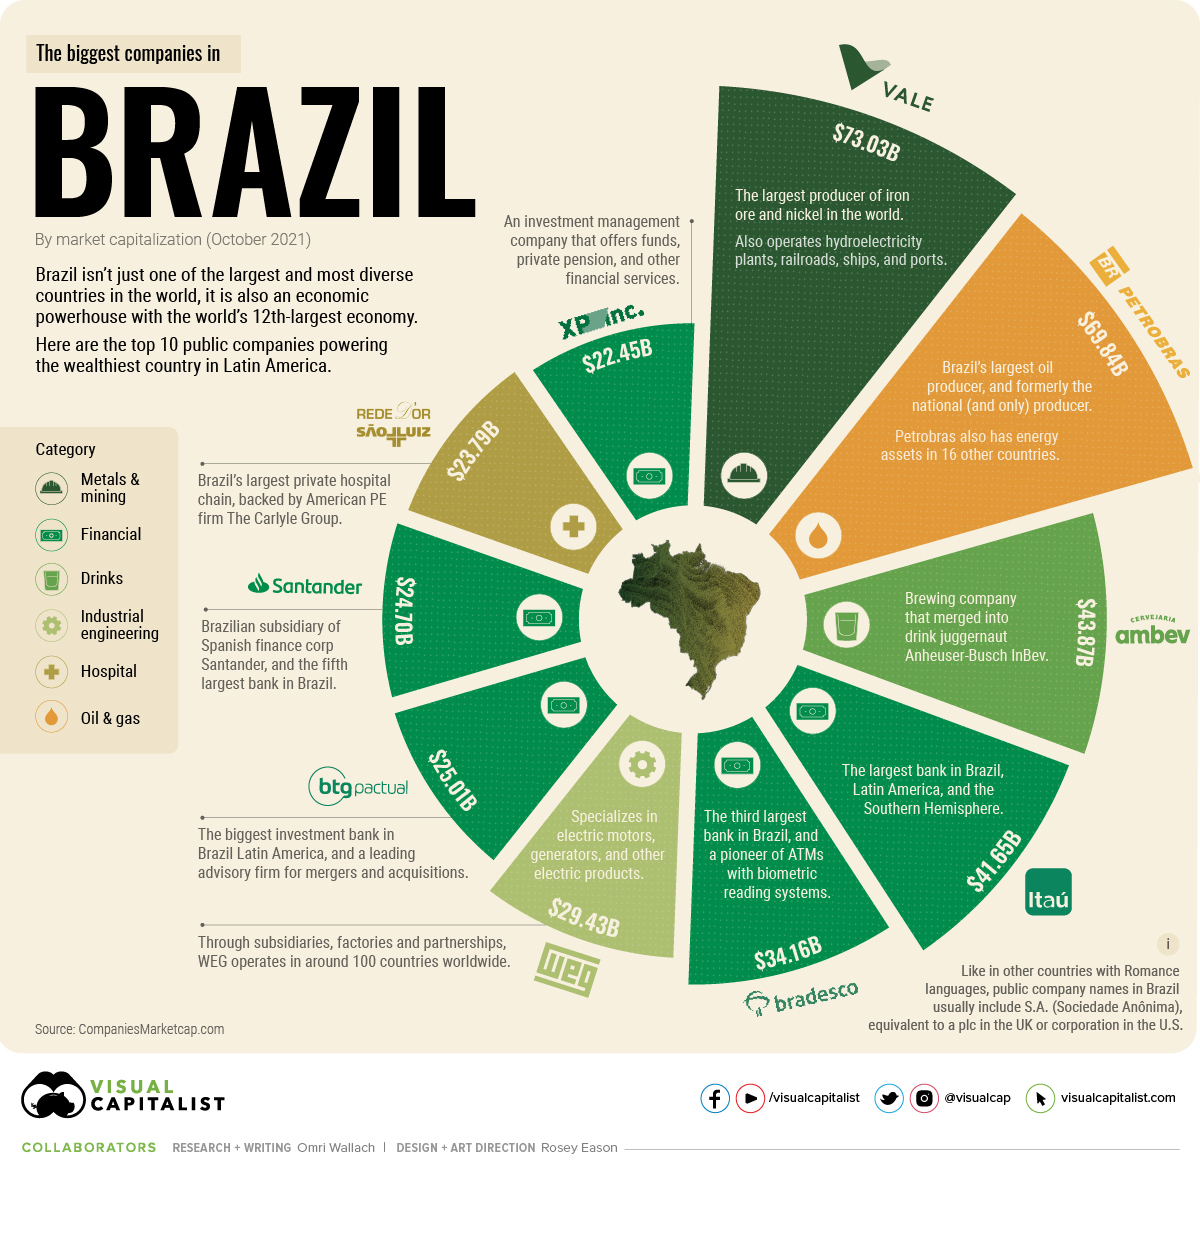 Visualizing the Top 10 Biggest Companies in Brazil